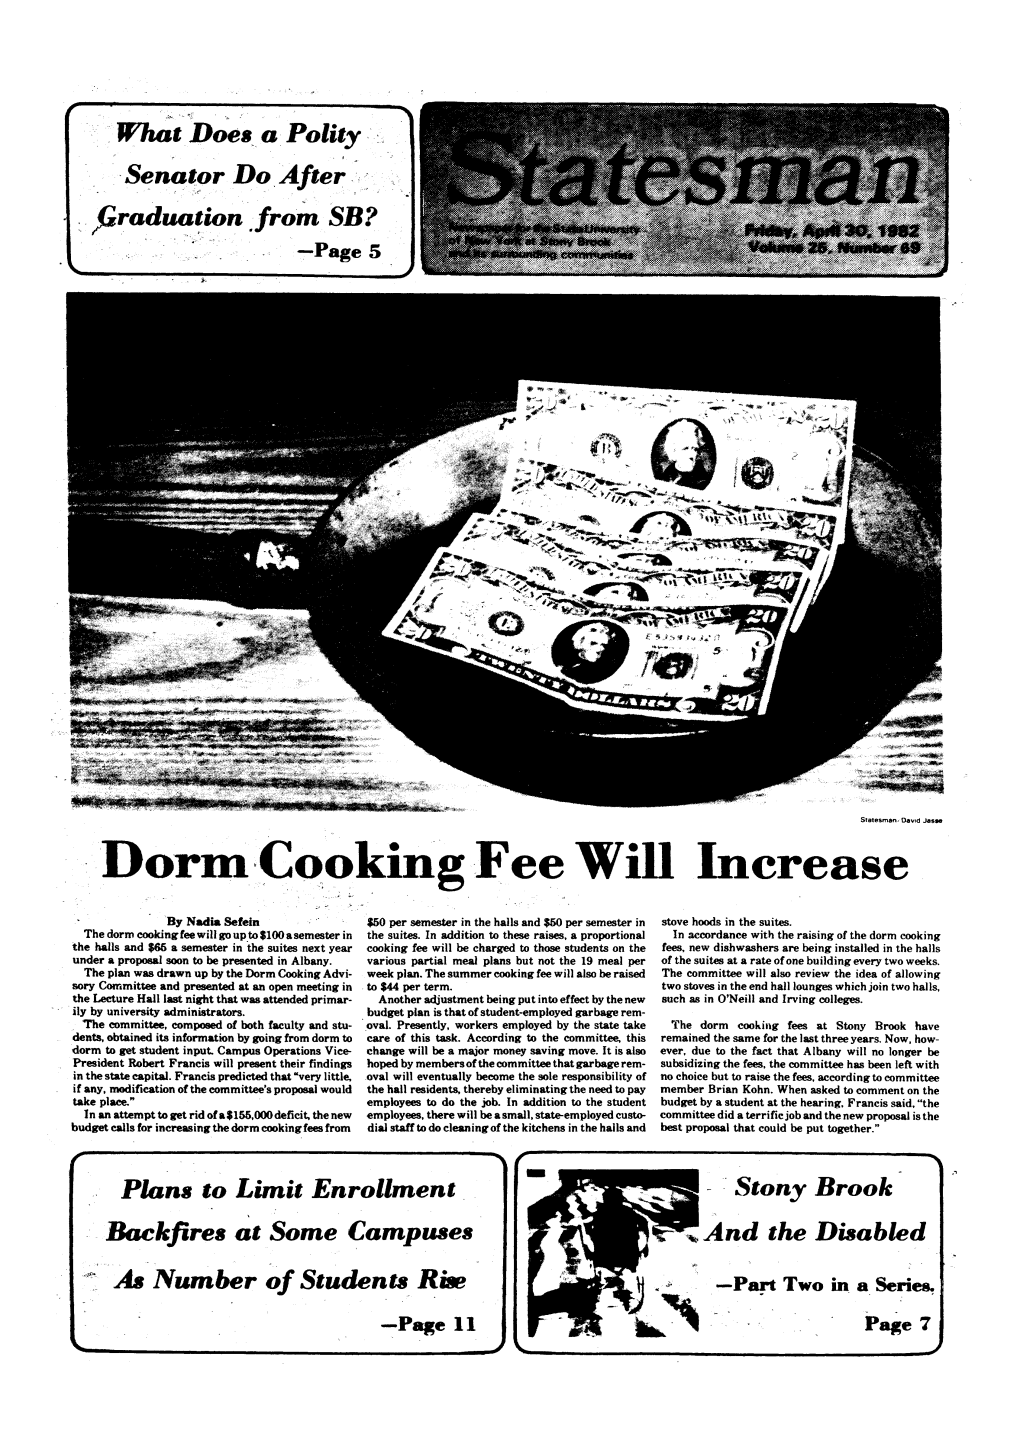 Dorm Cooking Fee Will Increase